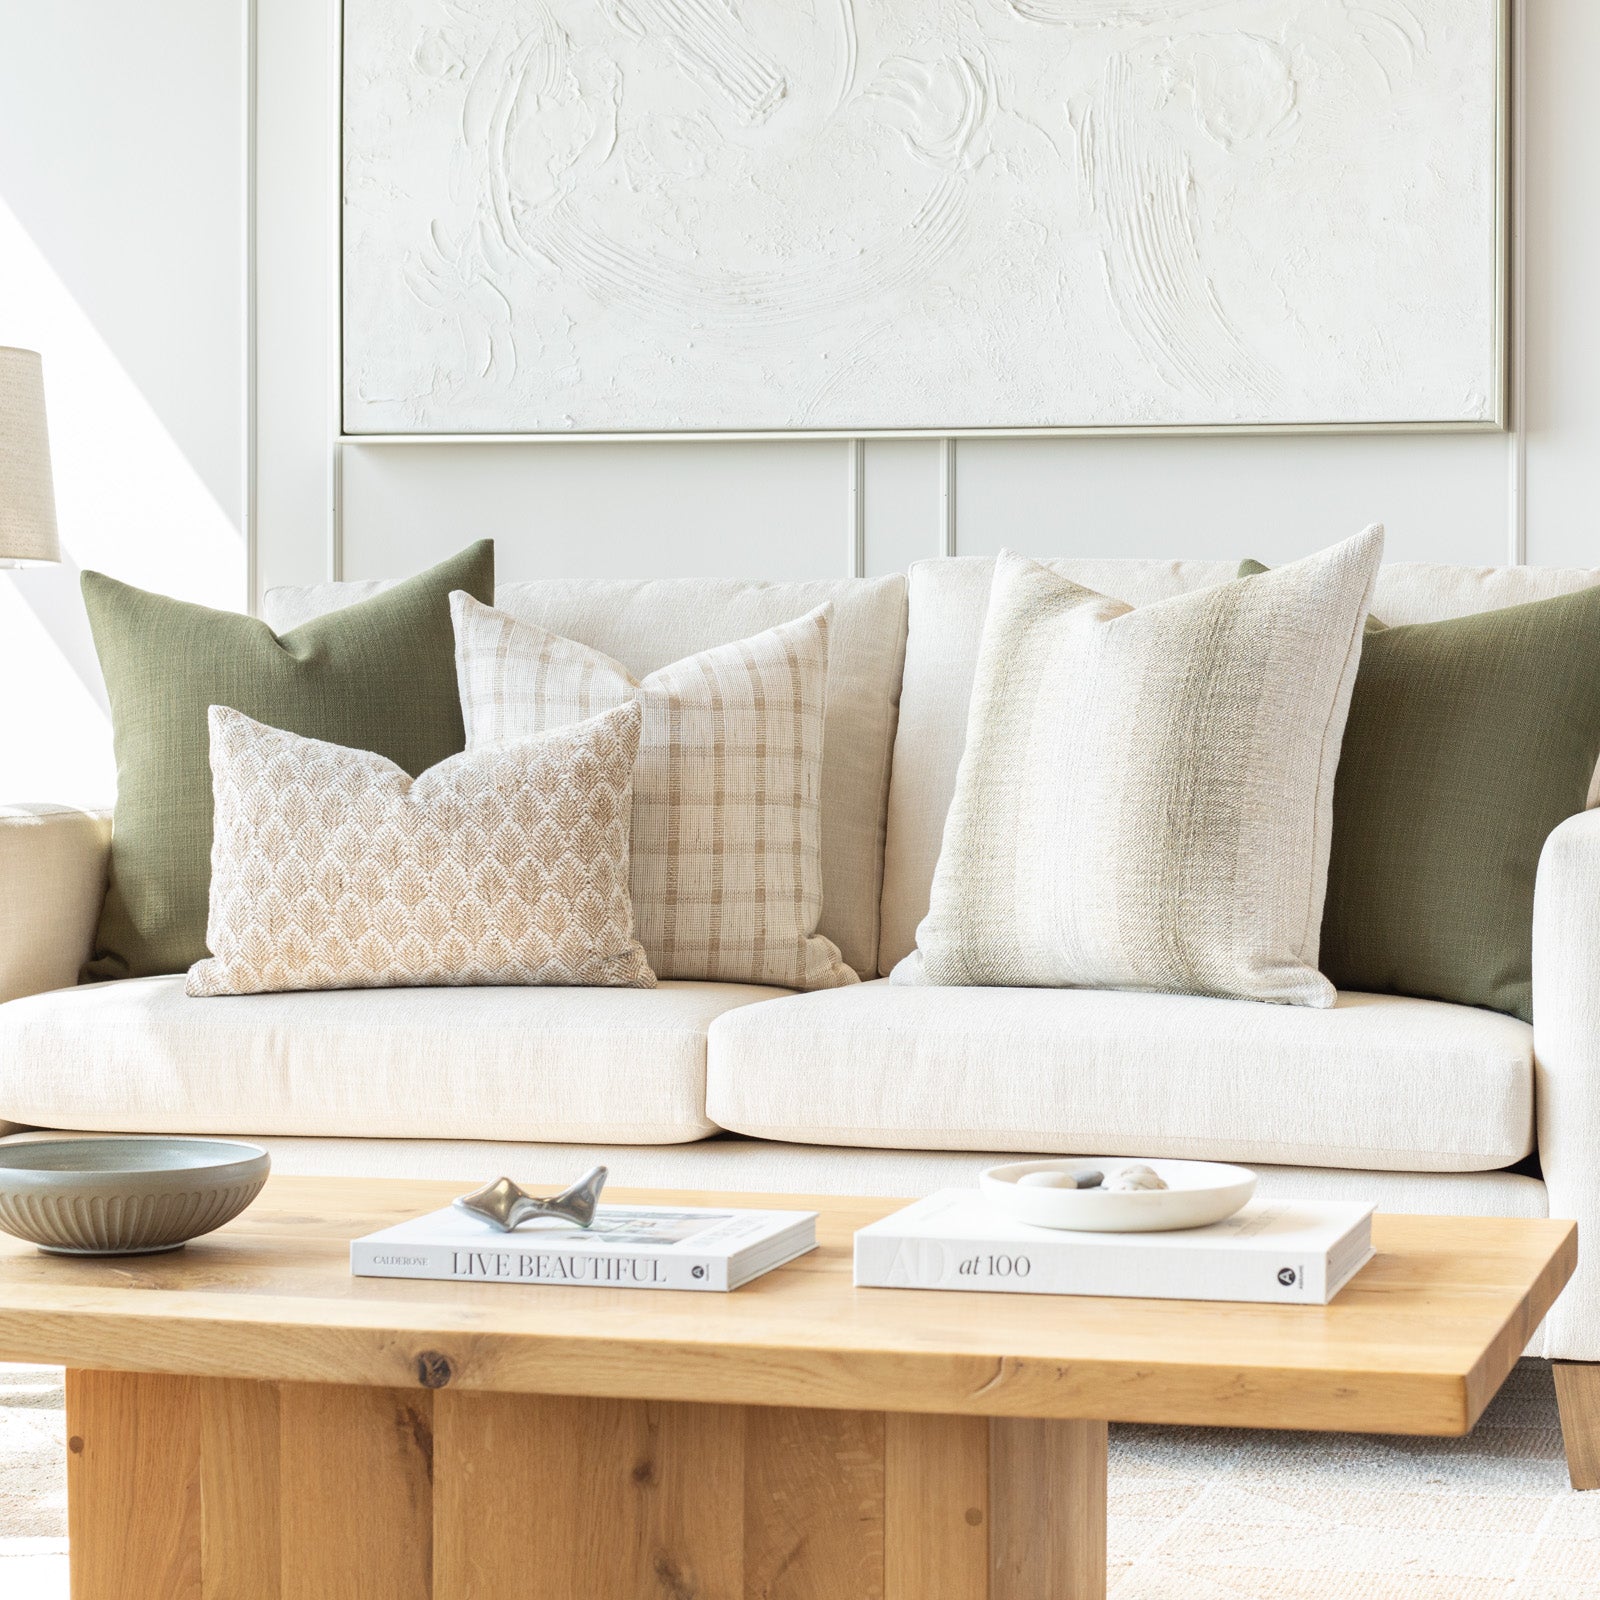  Neutral and Moss Sofa Pillow Pairing: a combination of cream, flax and mossy green pillows